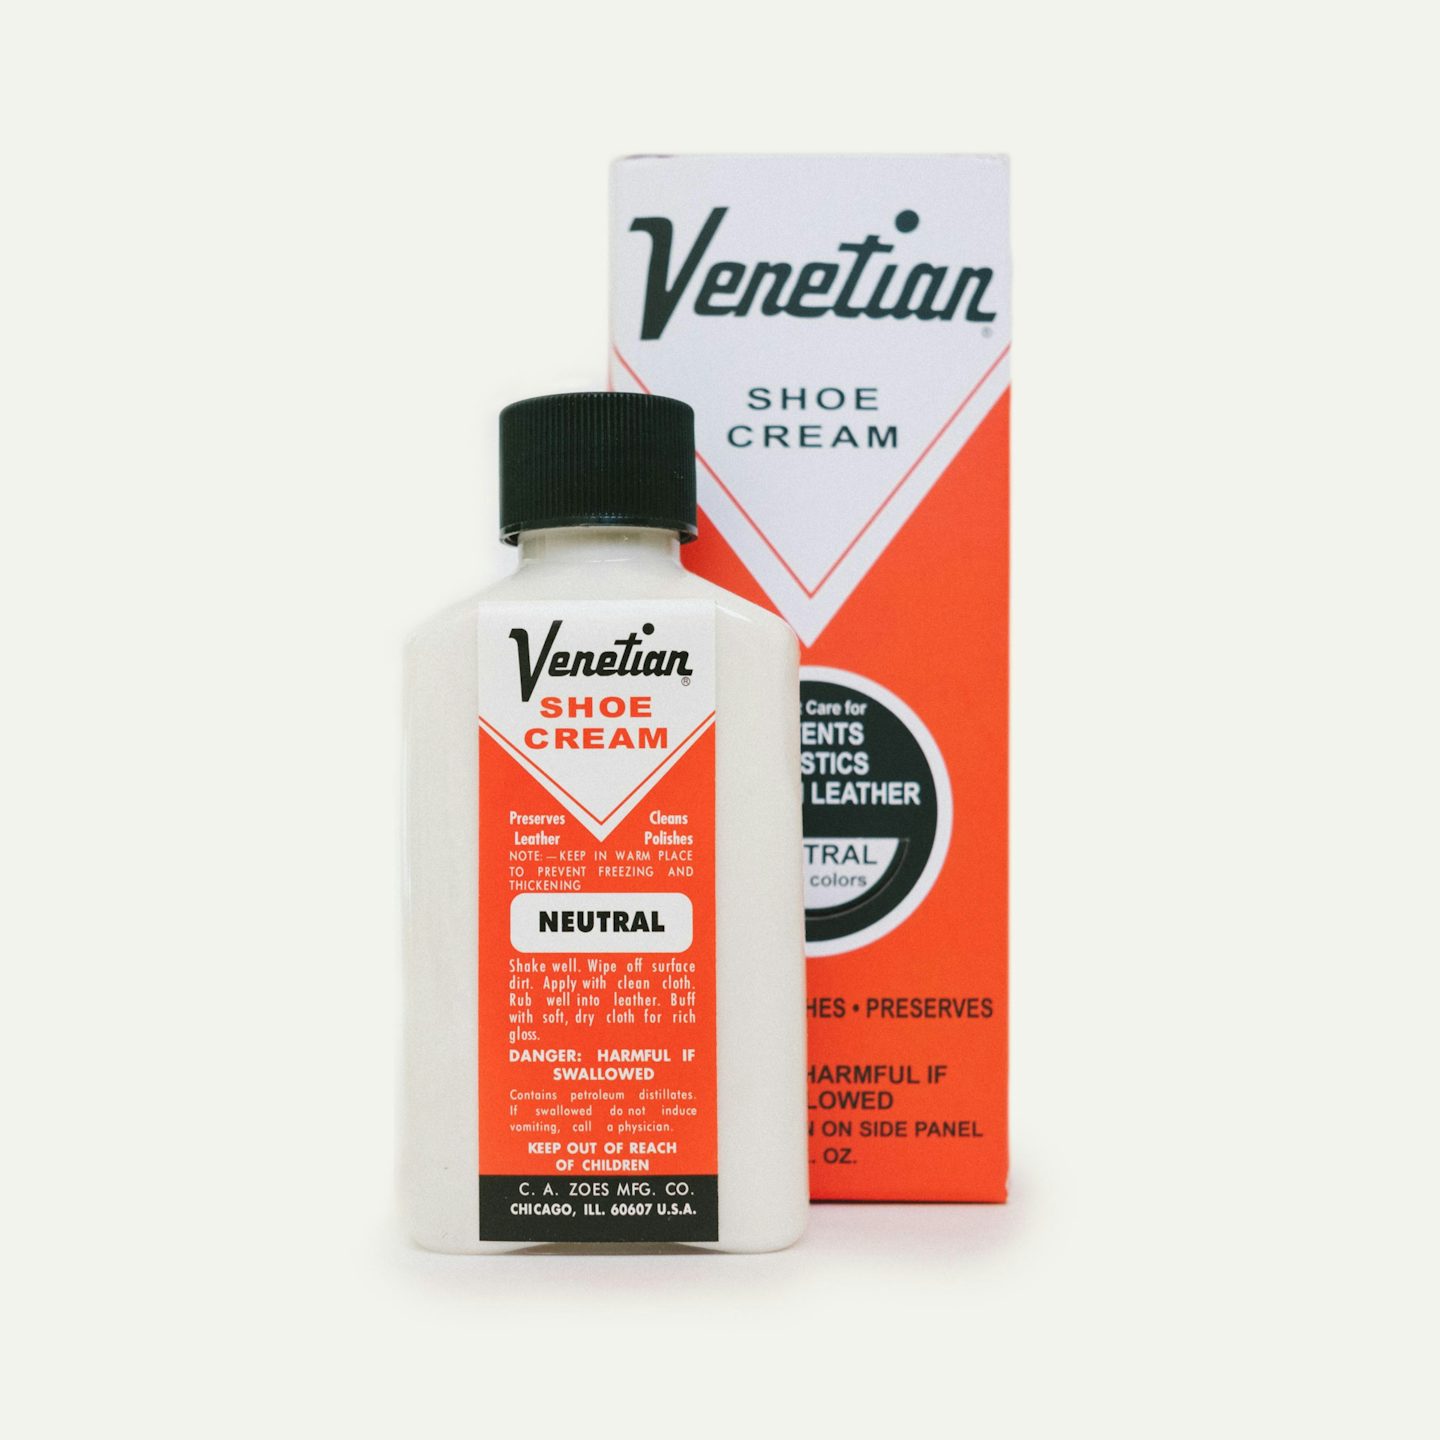 Venetian Shoe Cream - 3oz Bottle - Made in U.S.A. by C.A. ZOES MFG. CO. - View 2